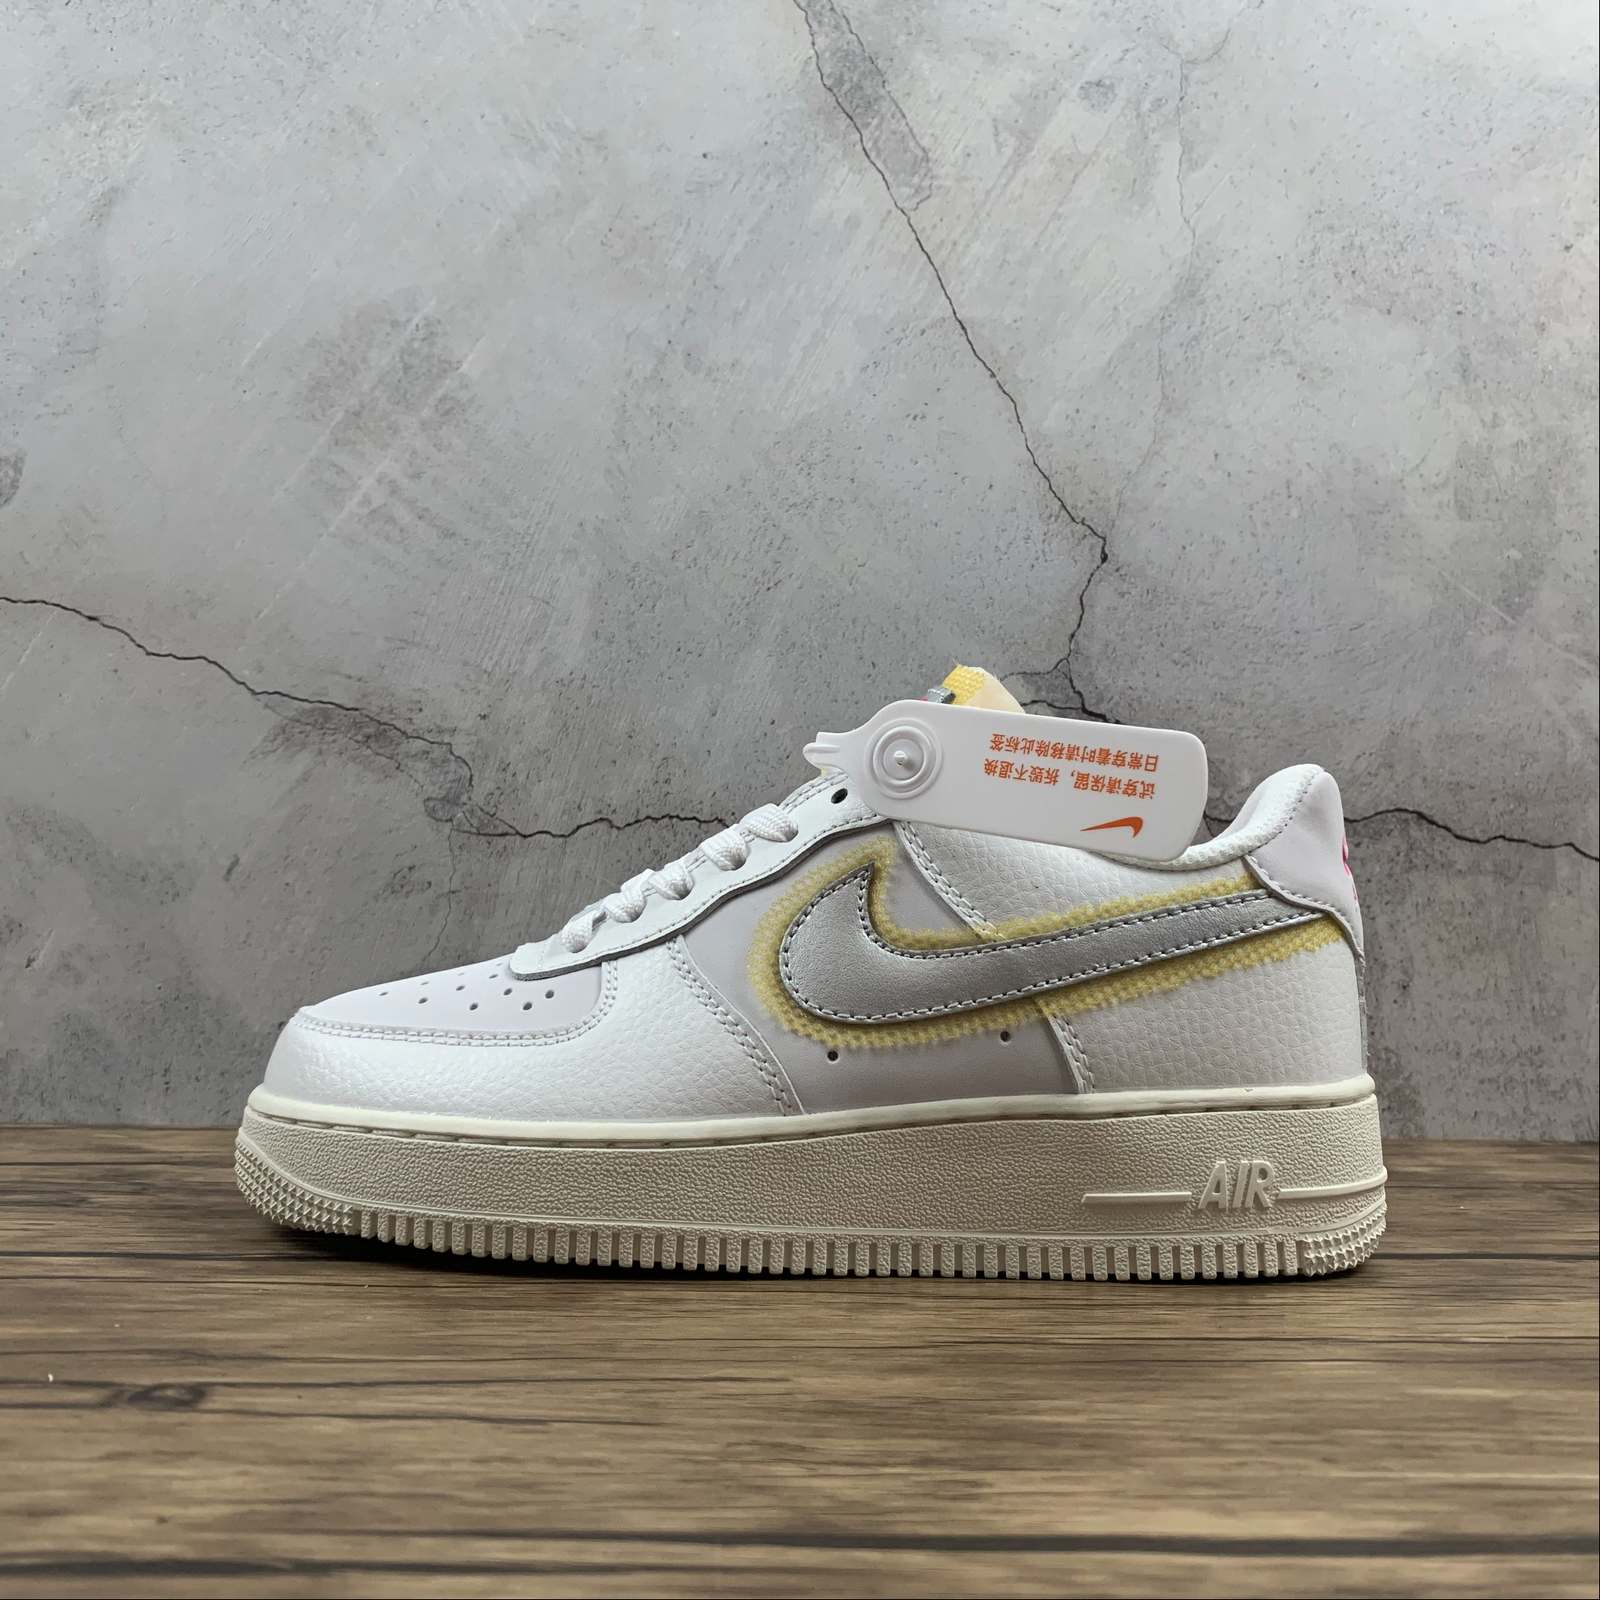 air force 1 all over logo for sale